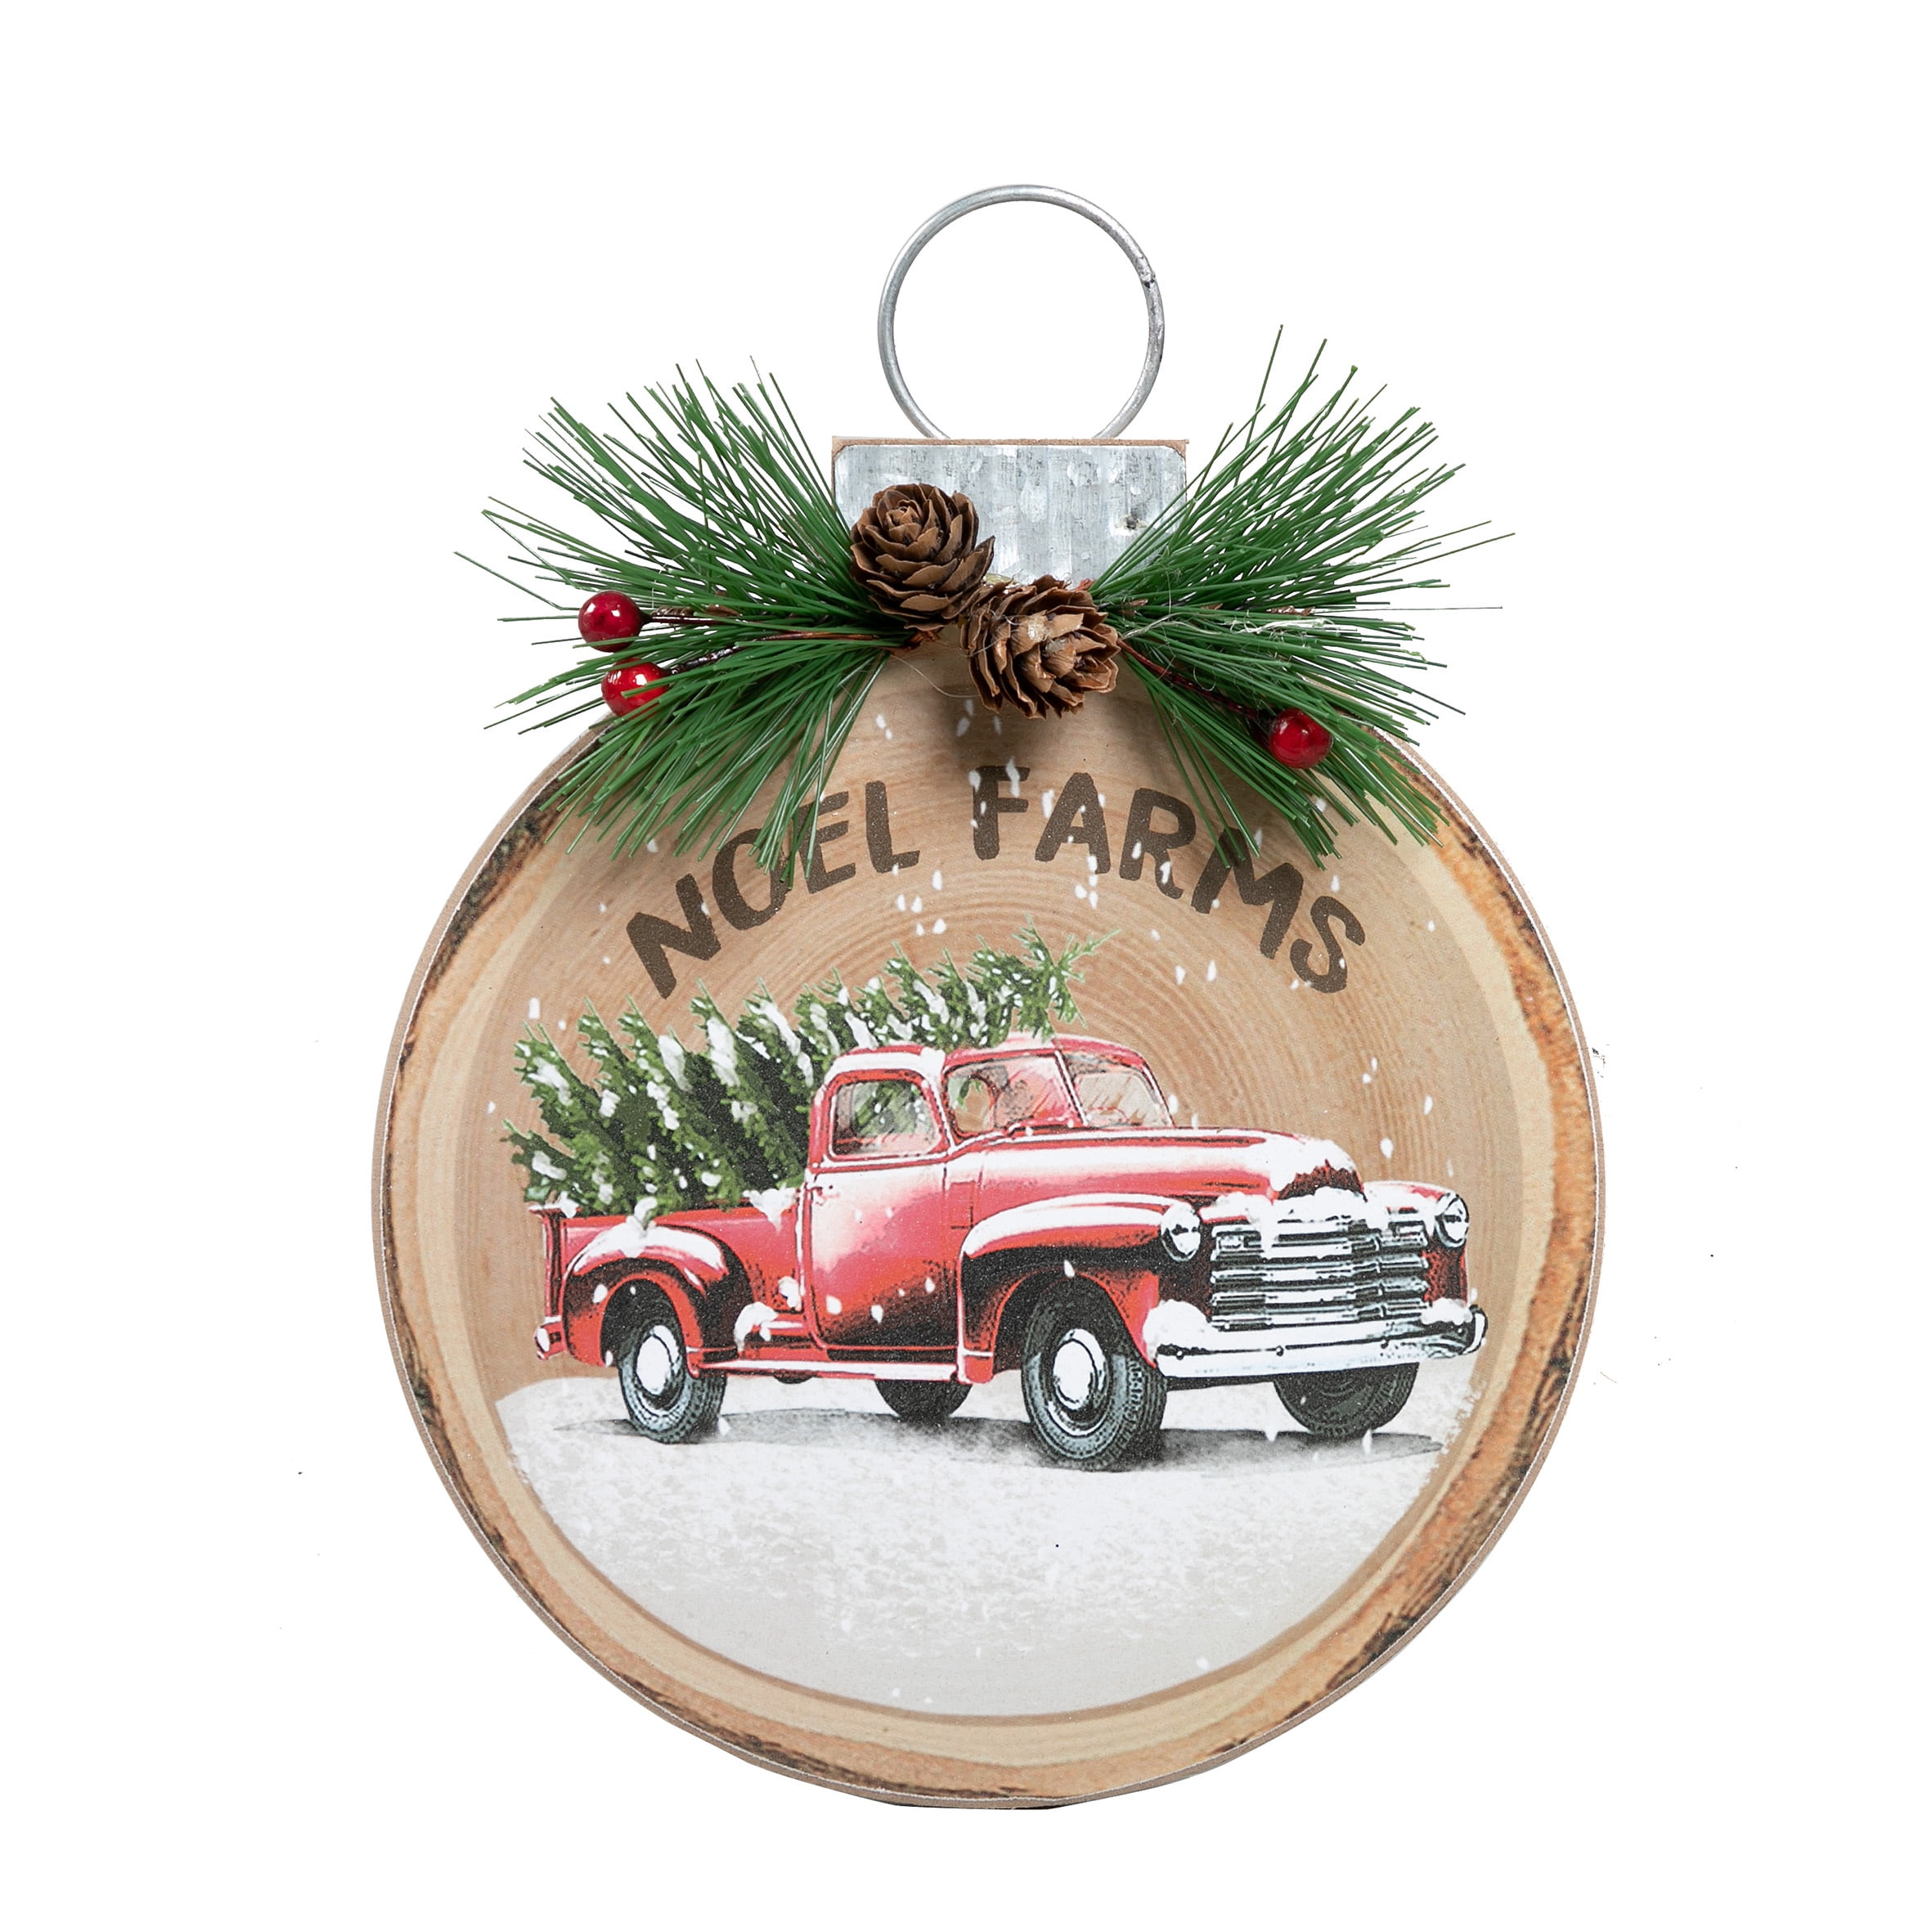 6PCS 2.17" L Christmas Pickup Truck Ornament for Home Holiday Decor Gifts 